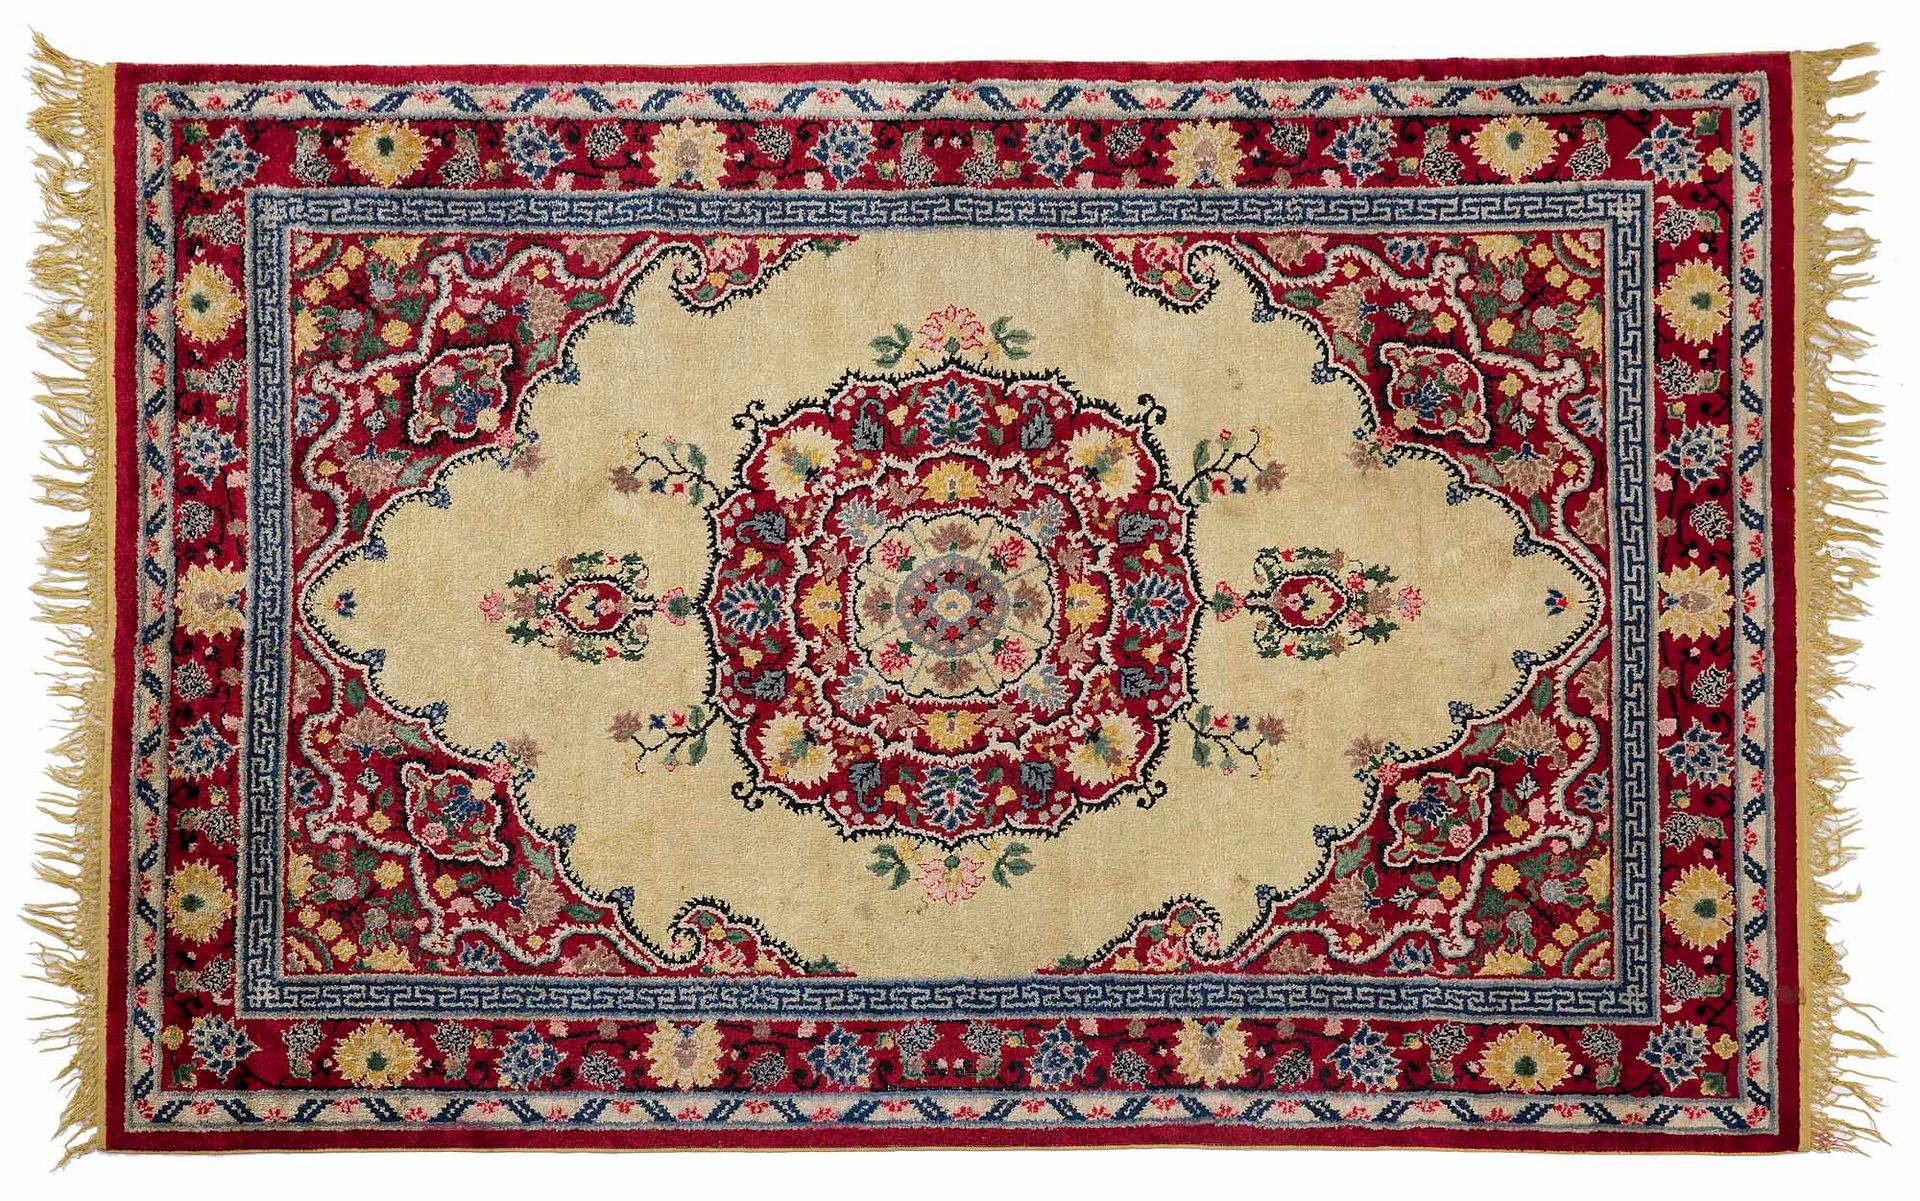 Null Silk SINKIANG carpet (Central Asia), mid 20th century

Dimensions : 275 x 1&hellip;